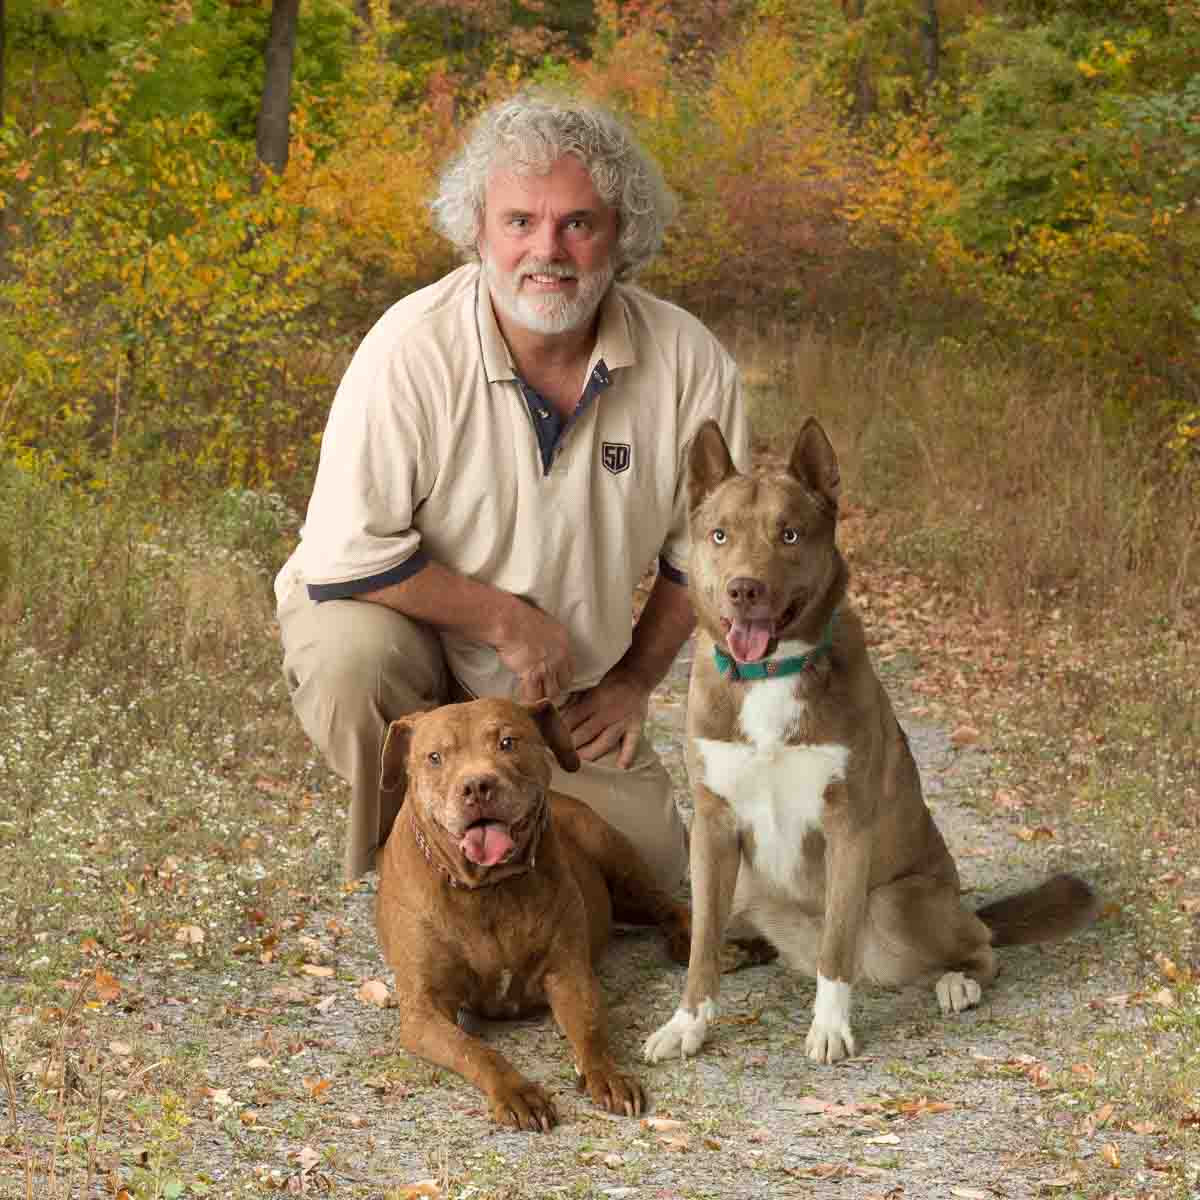 A man kneeling down next to two dogs.